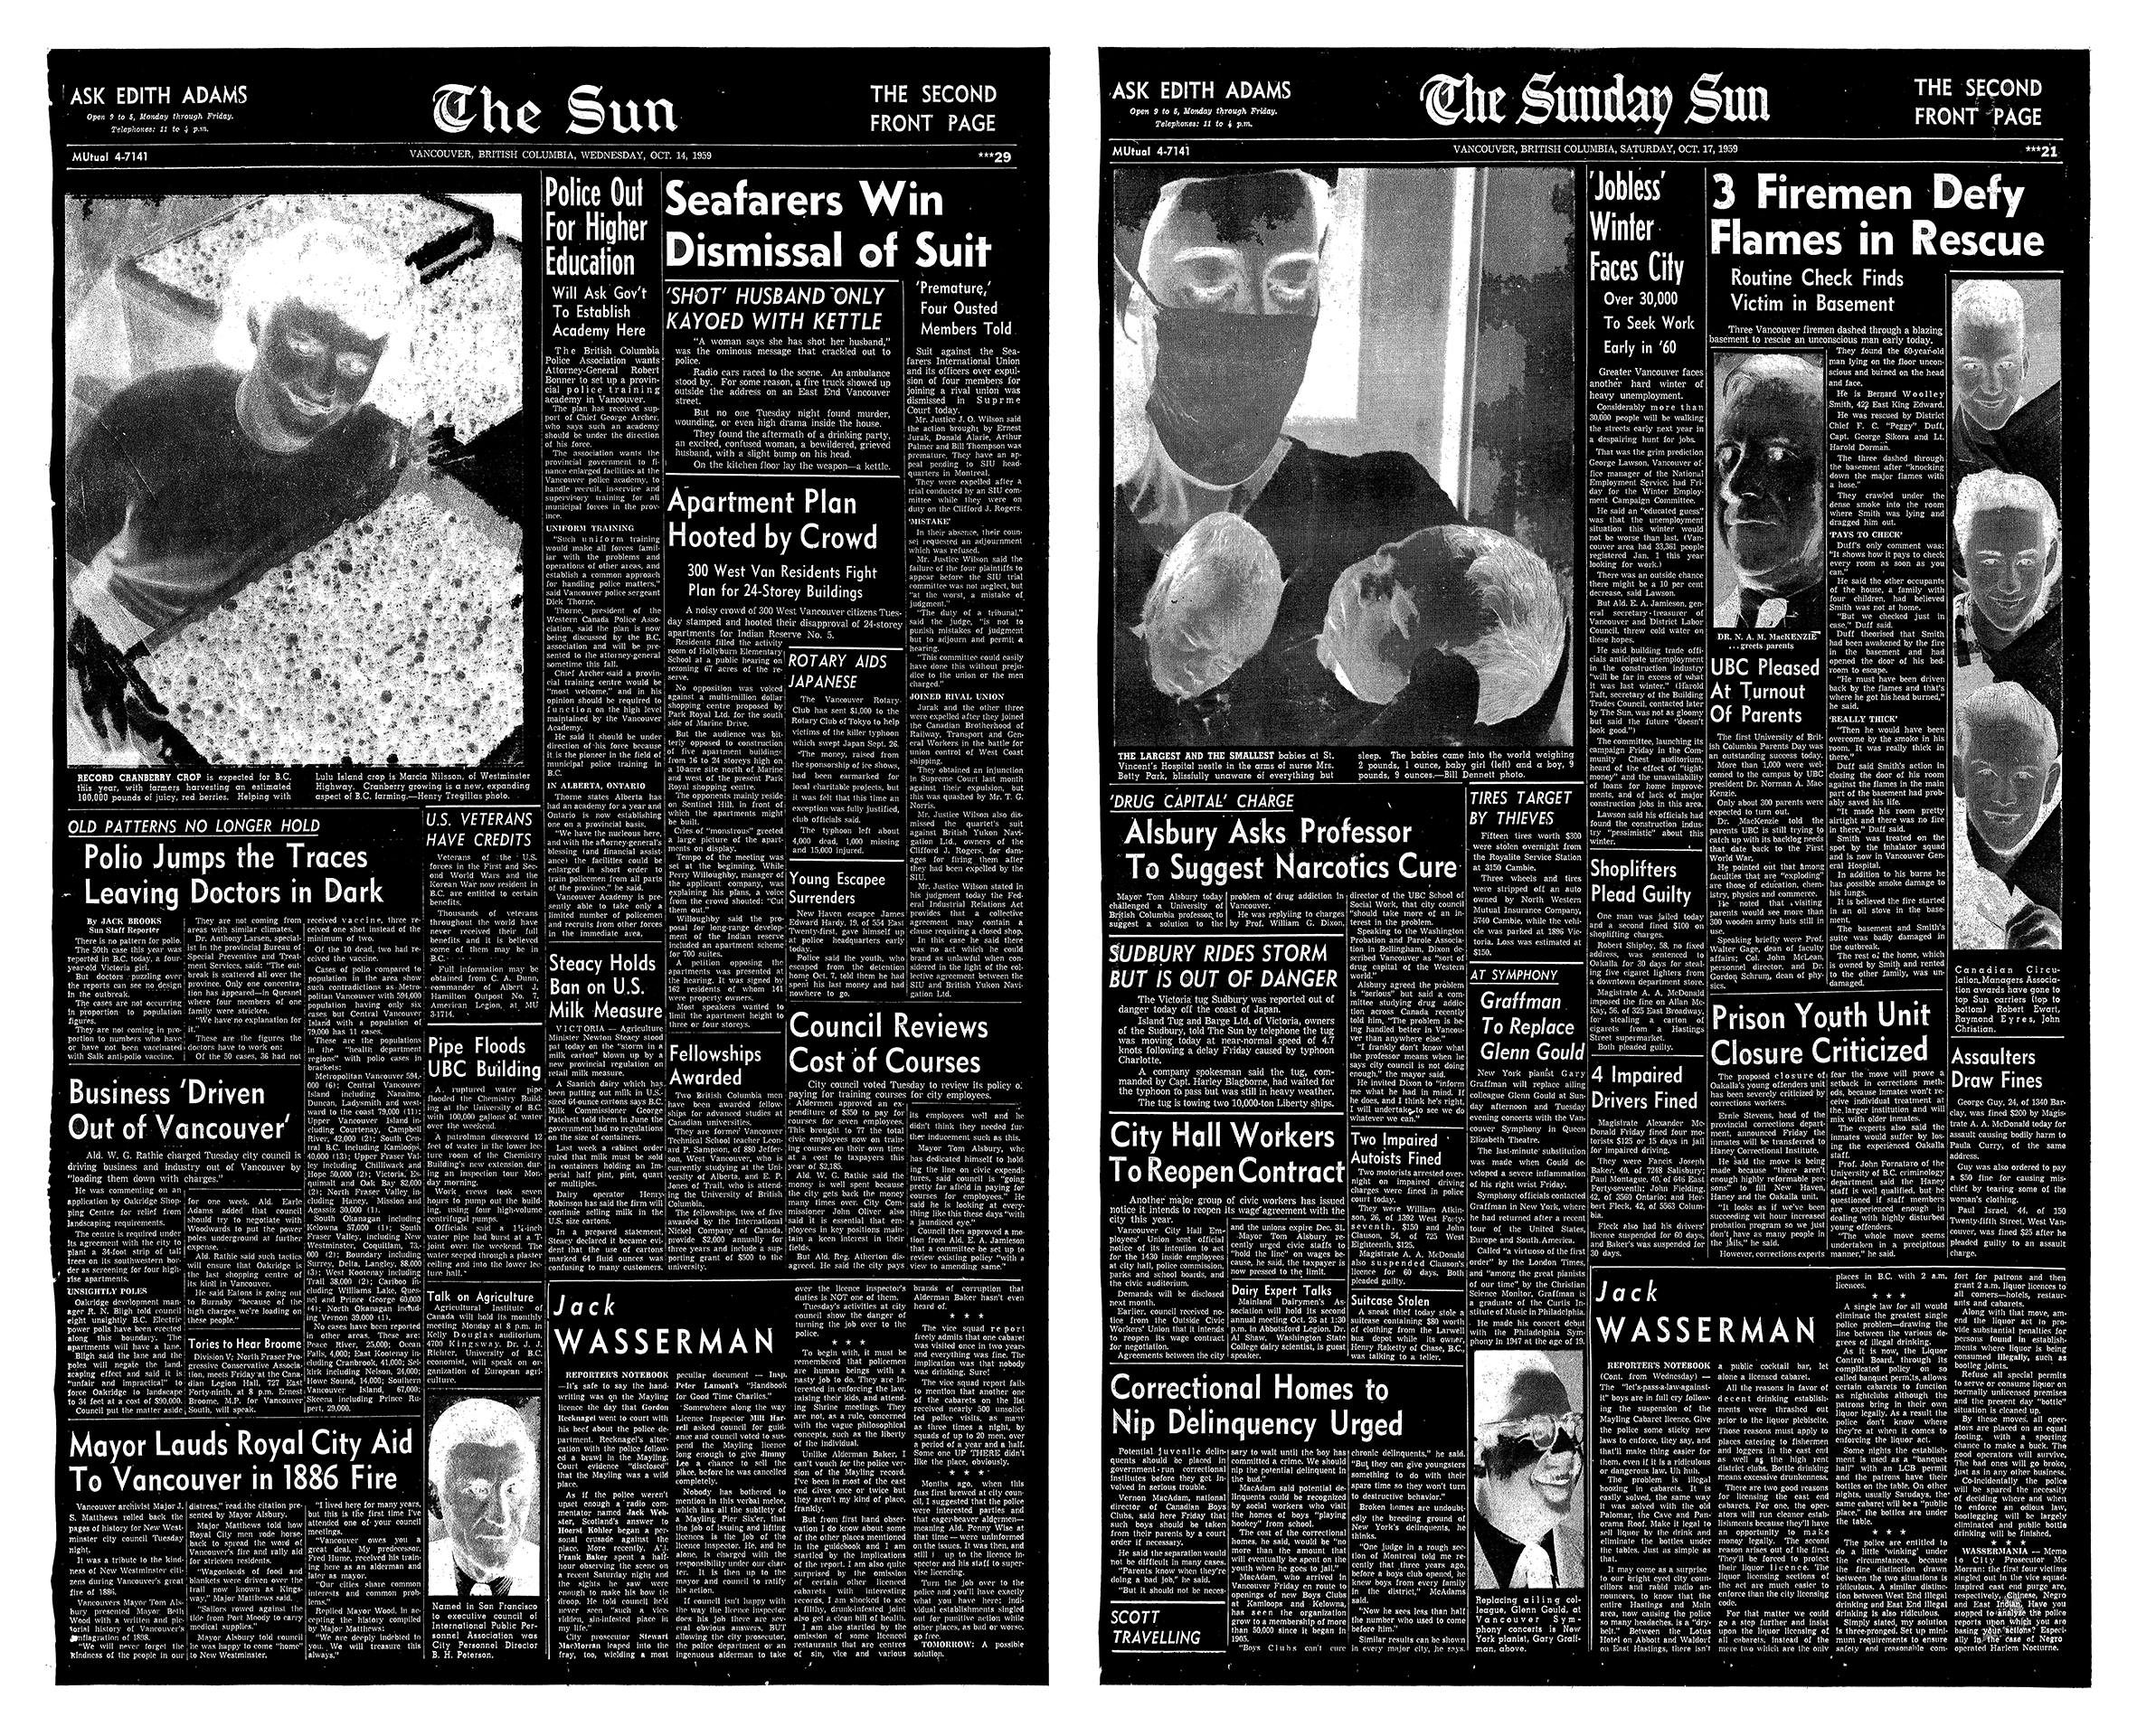 A black and white image of two newspaper pages side by side. The image has been inverted so that the papers appear black with white text, and the images appear ghostly. 